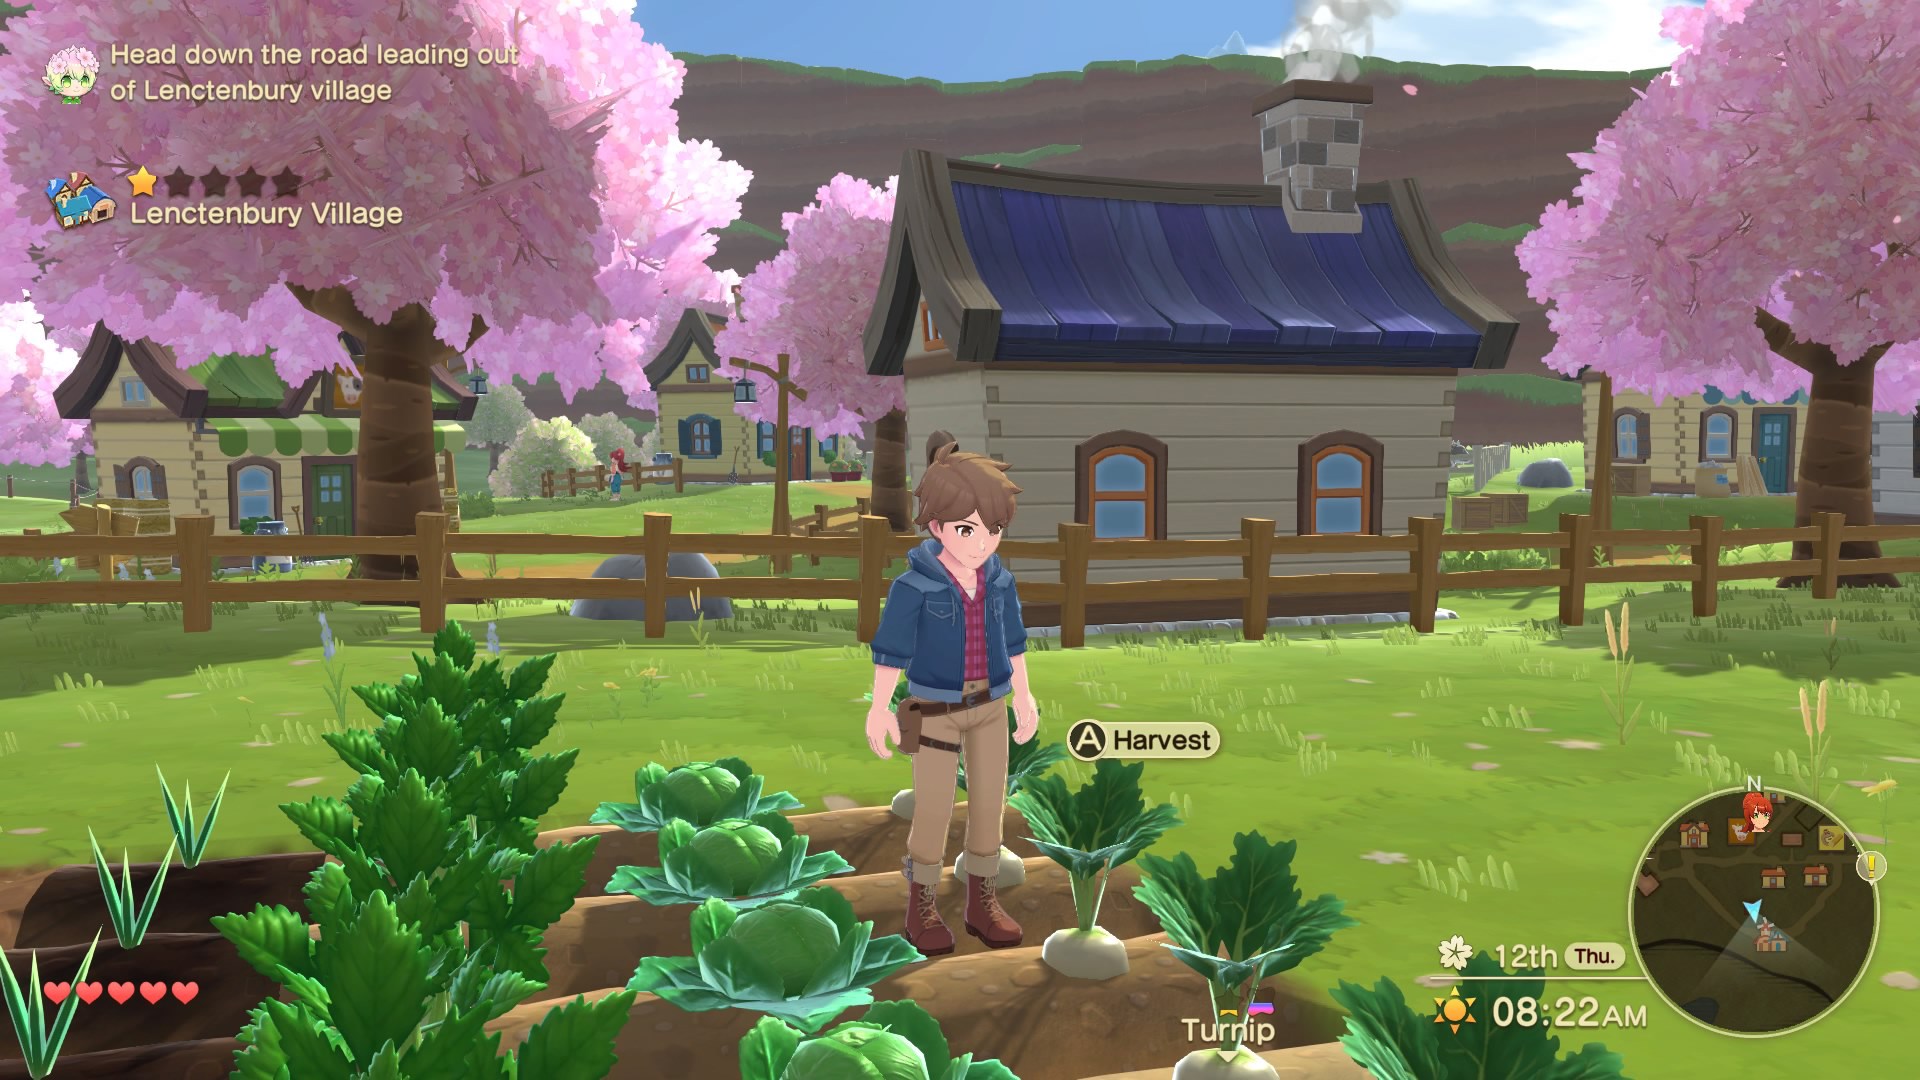 Enjoy even more farming in Harvest Moon: The Winds of Anthos | TheXboxHub